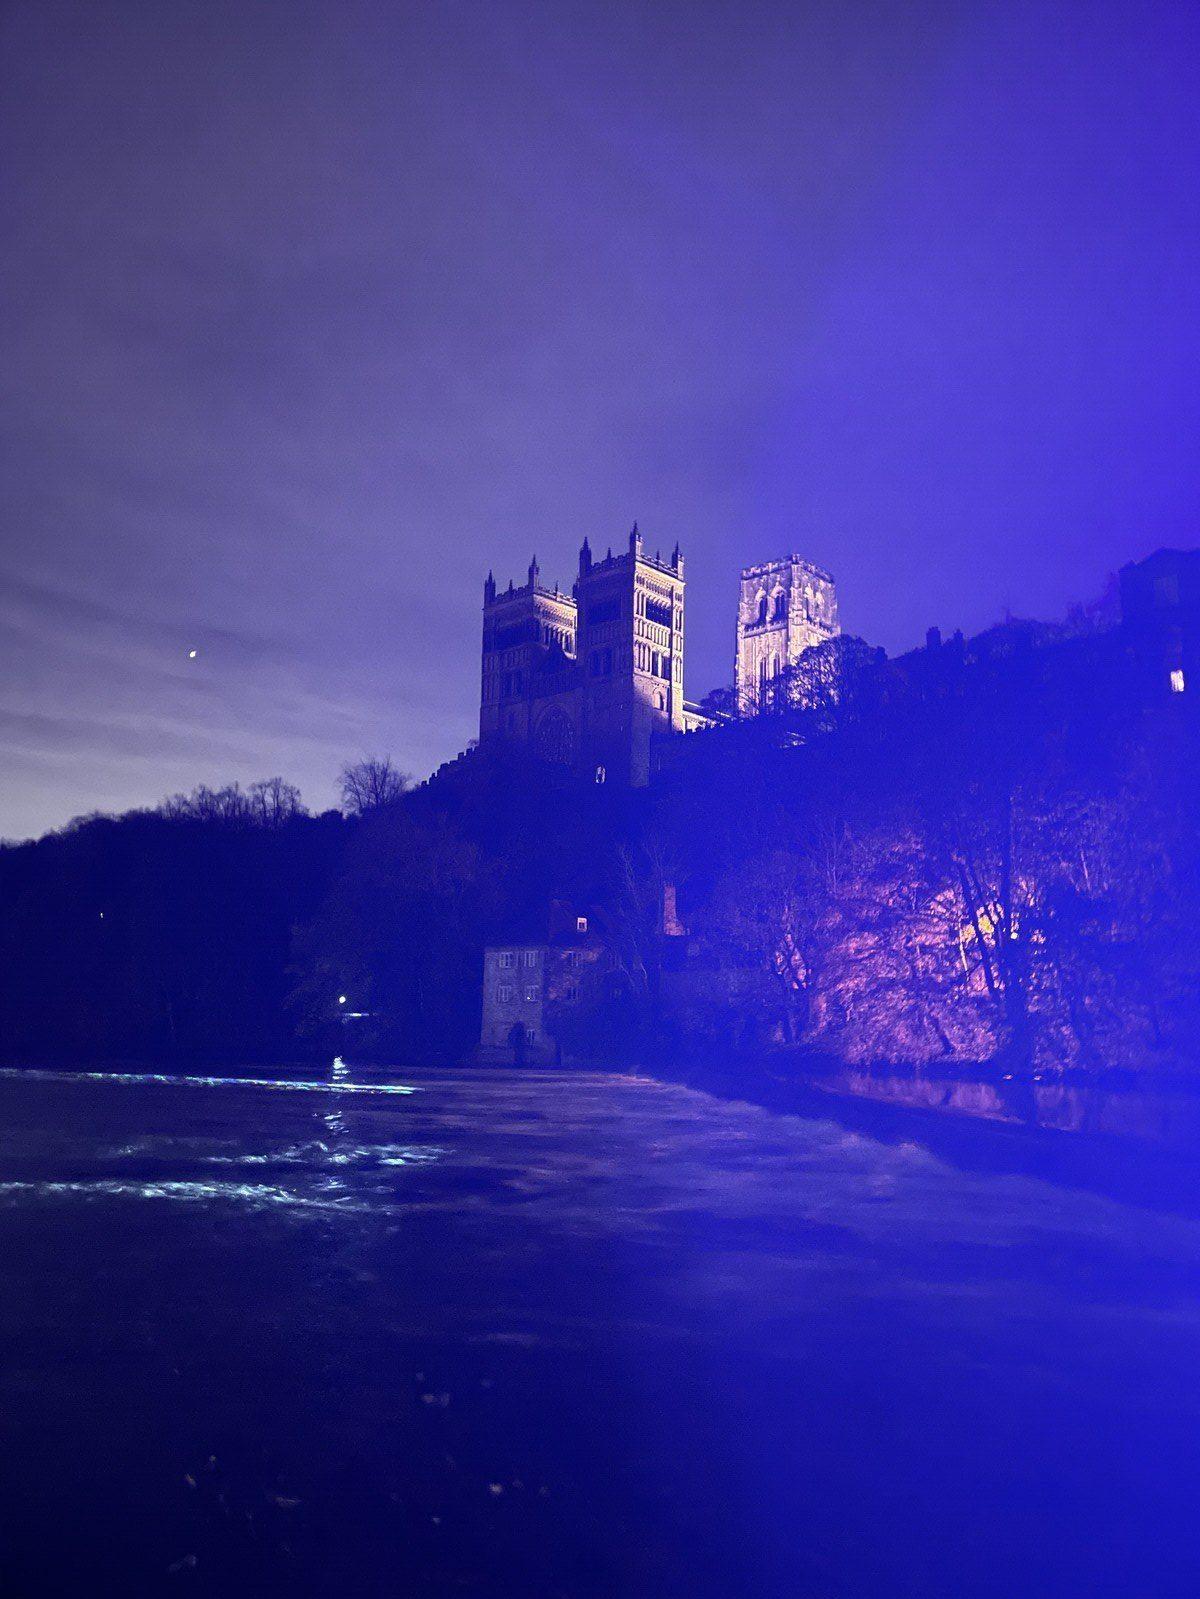 Durham Cathedral viewed from below, with the River Wear in the foreground, illuminated by a blue glow from somewhere off to the right